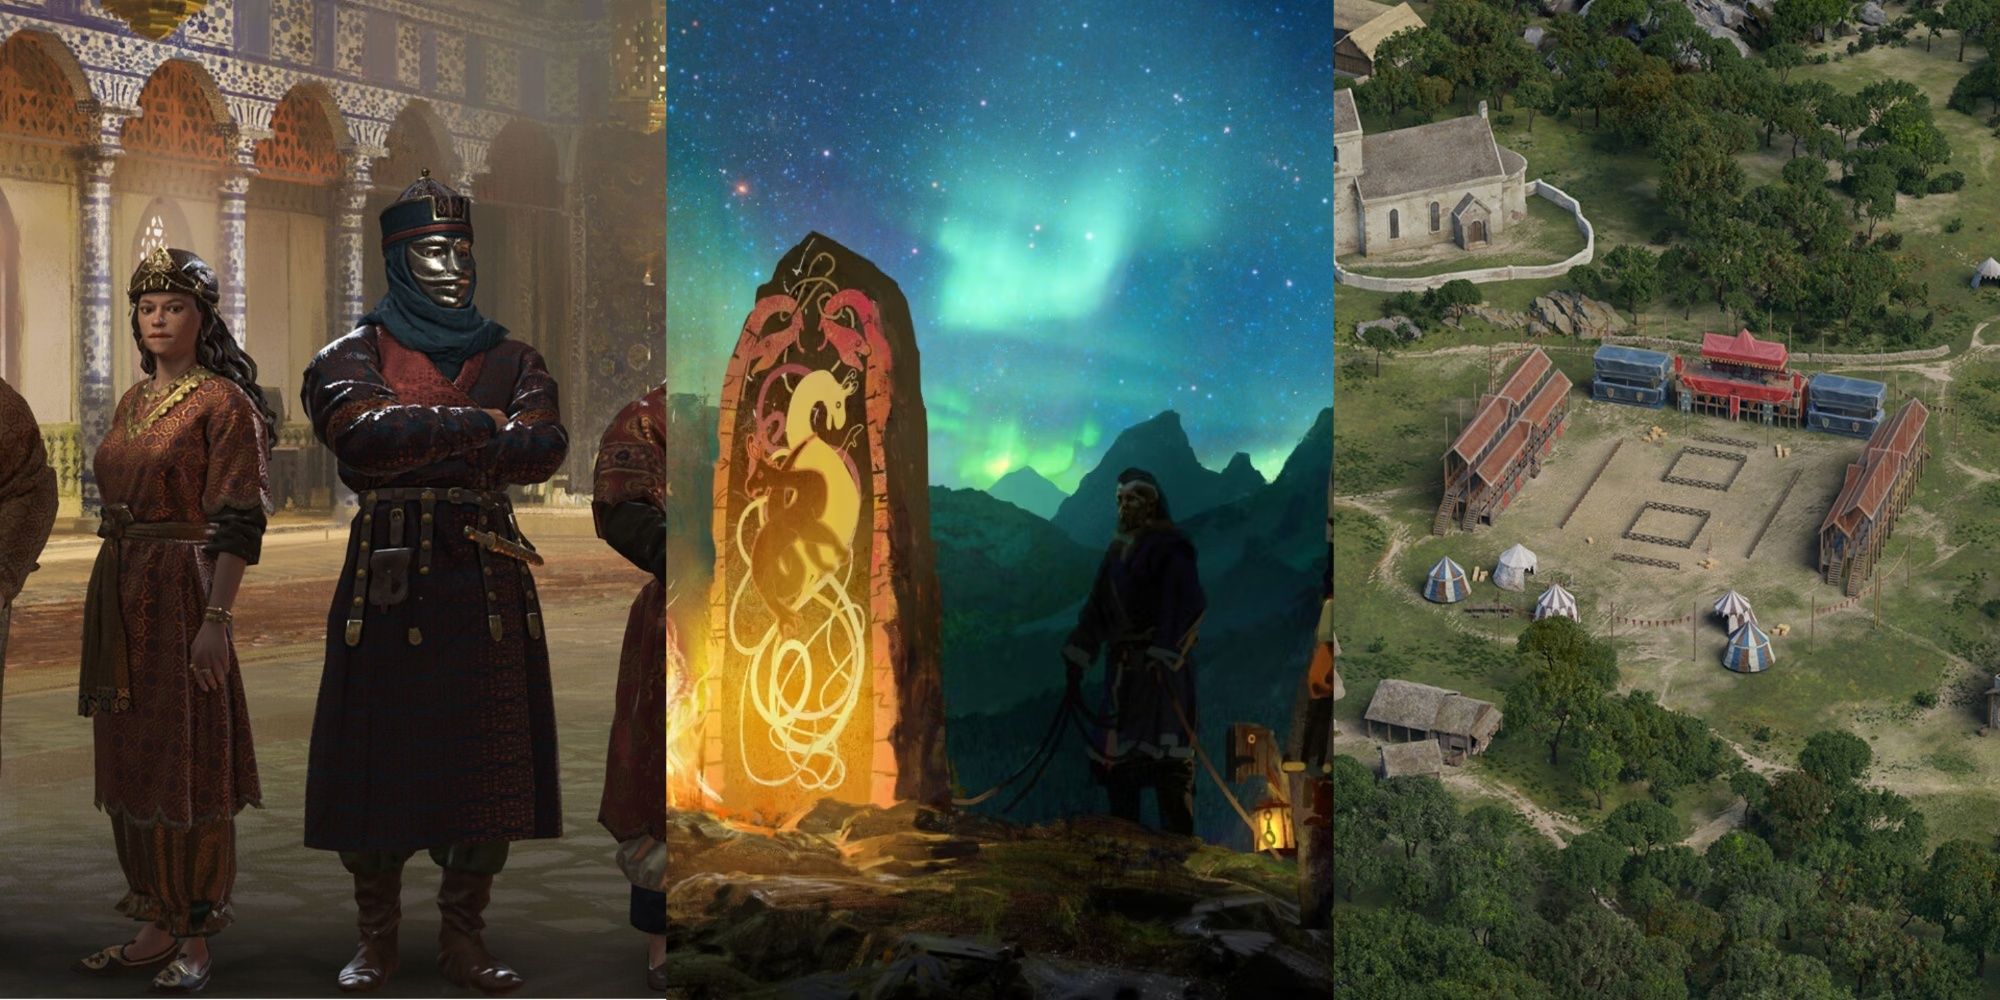 Crusader Kings 3 Persian characters stood together, Runestone and the northern lights in the background, a tourney in Crusader kings 3 left to right